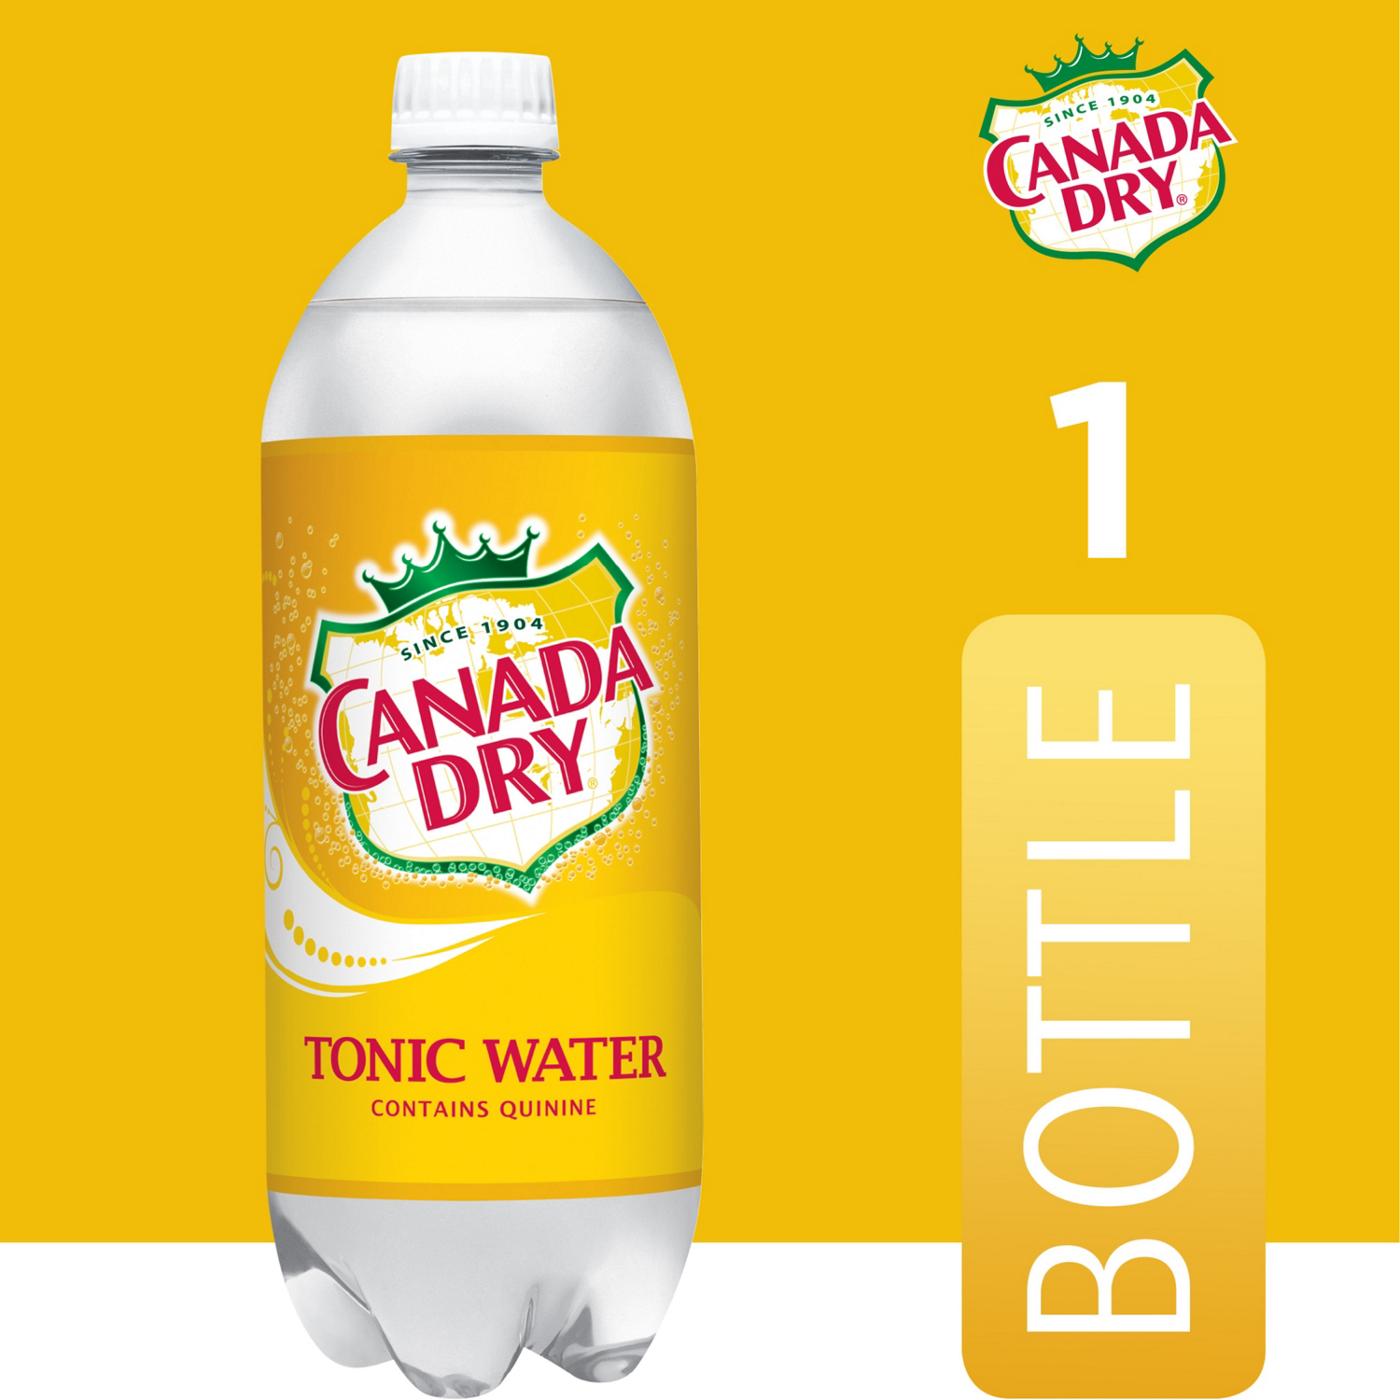 Canada Dry Tonic Water; image 2 of 2